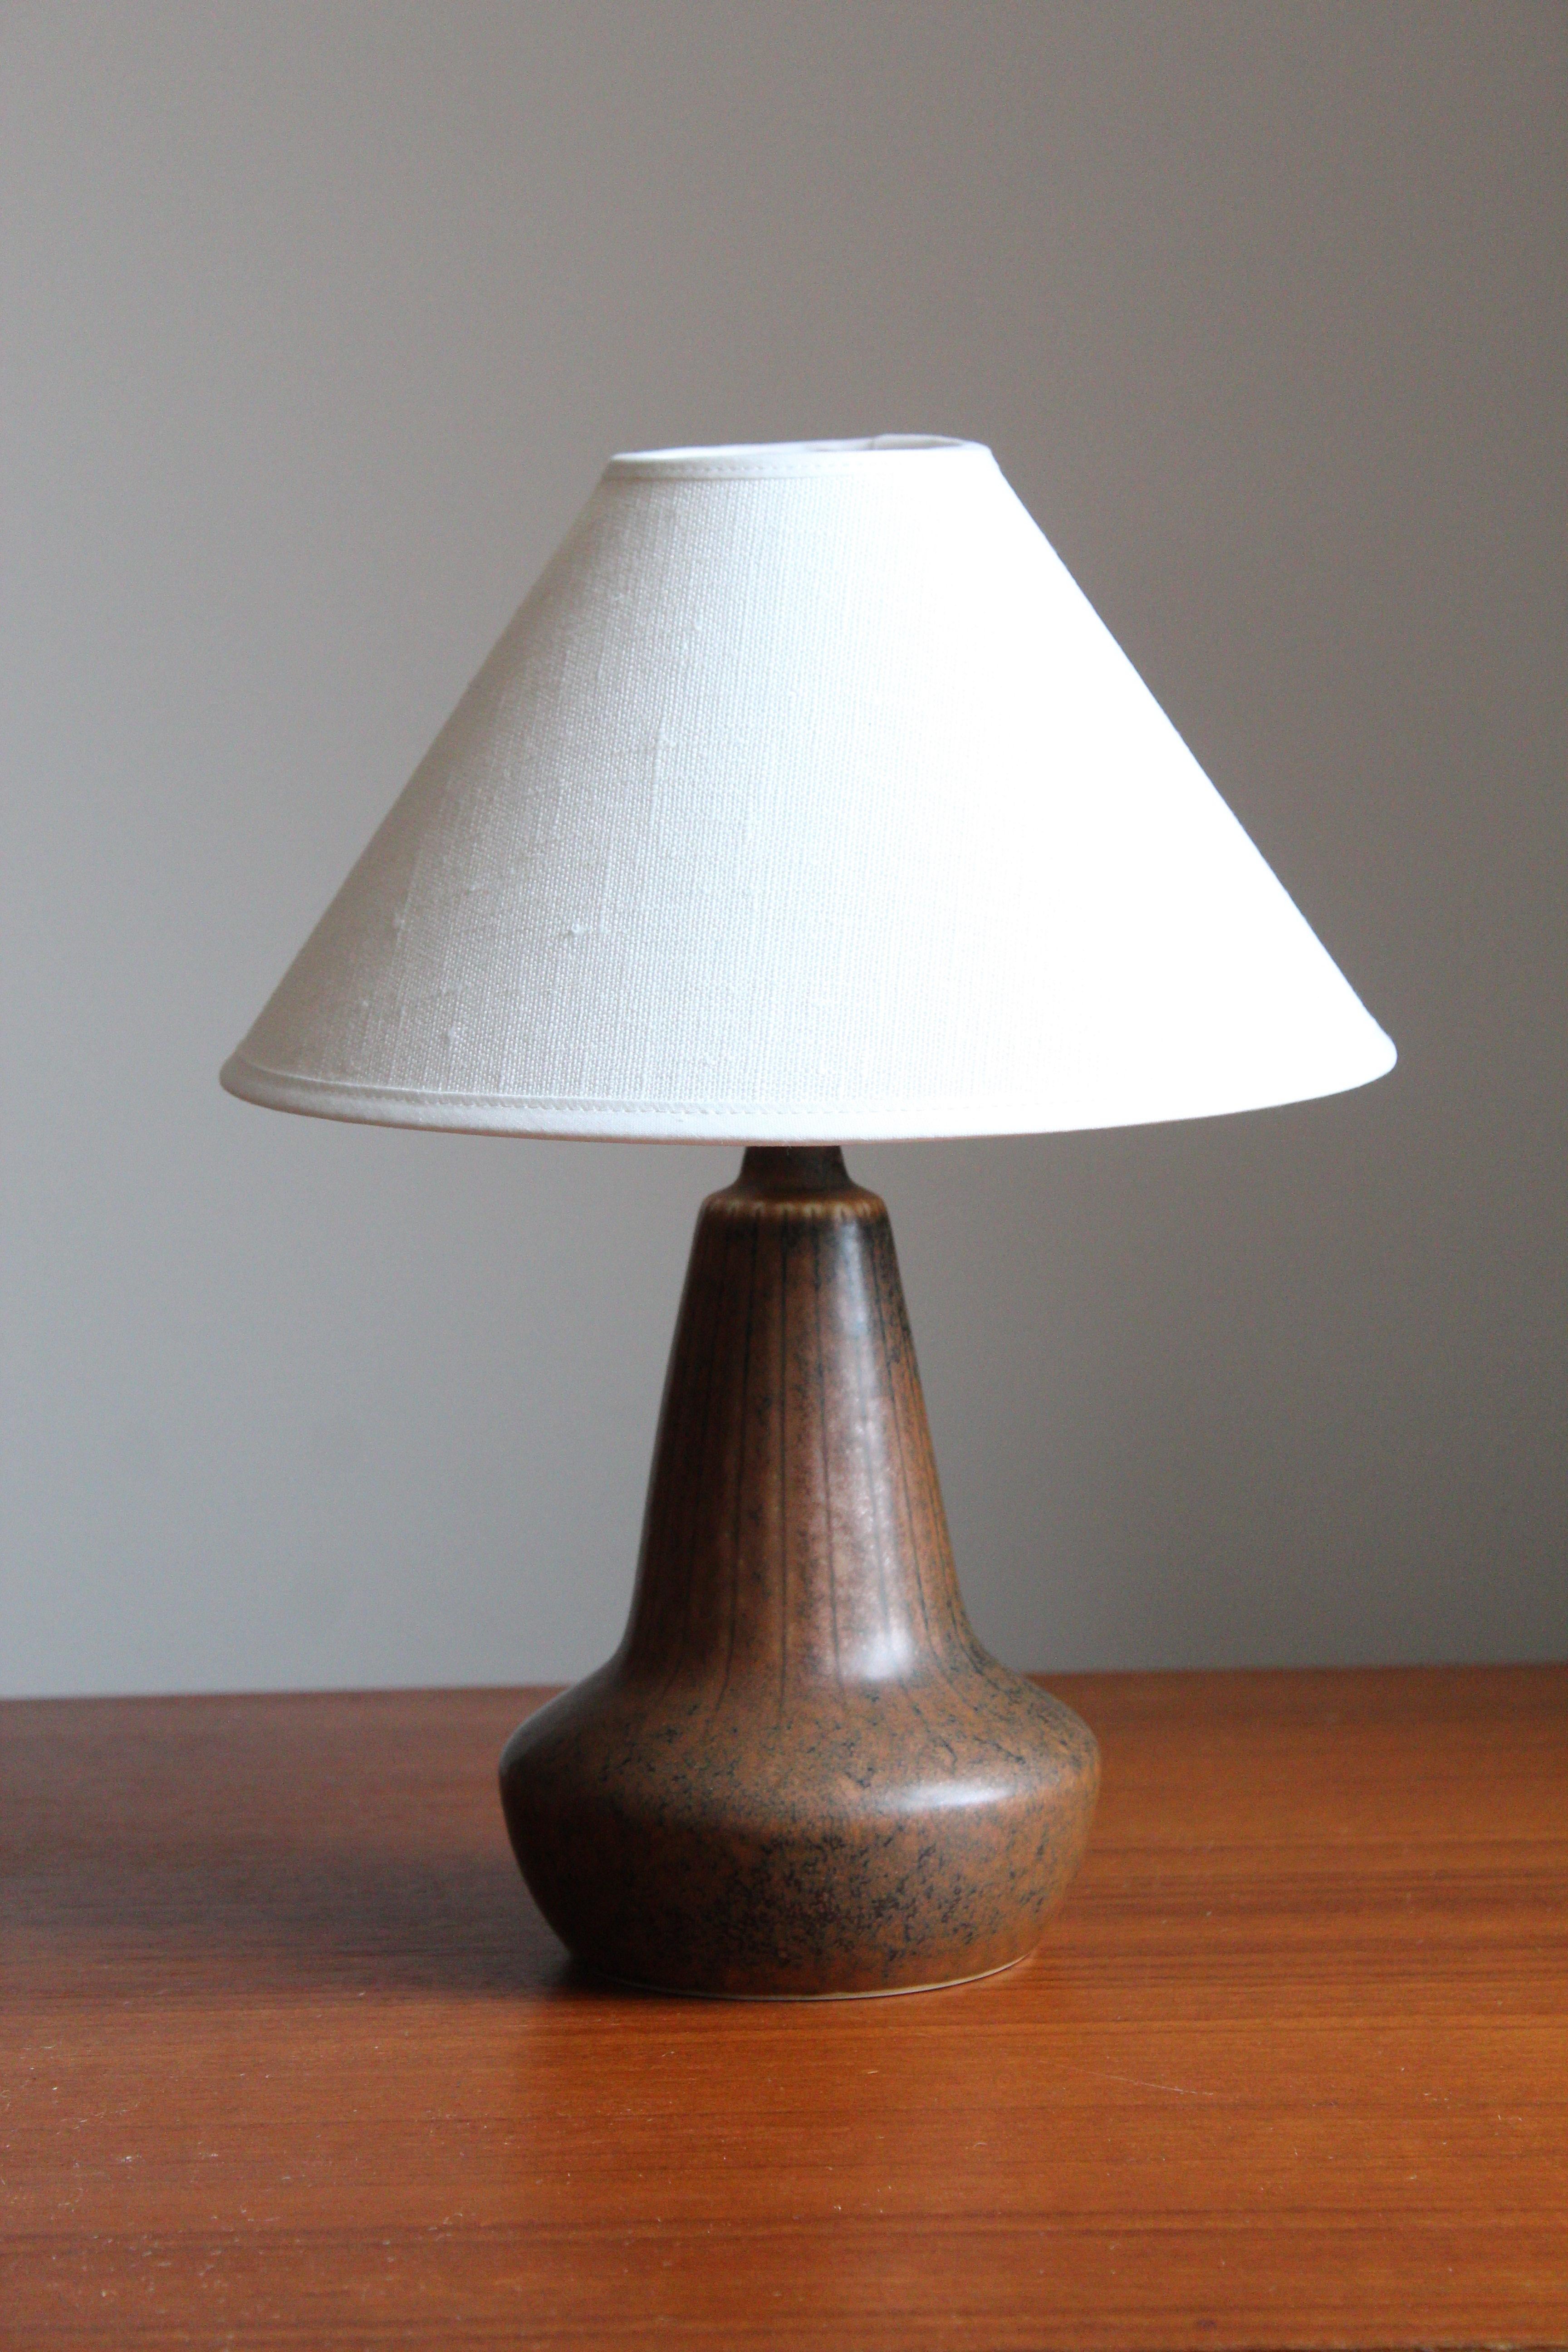 A table lamp produced by Rörstrand, Sweden, 1950s. Designed by Gunnar Nylund, (Swedish, 1914-1997). Signed.

Sold without lampshade, stated dimensions exclude lampshade.

Nylund served as artistic director at Rörstrand, where he worked, 1931-1955.